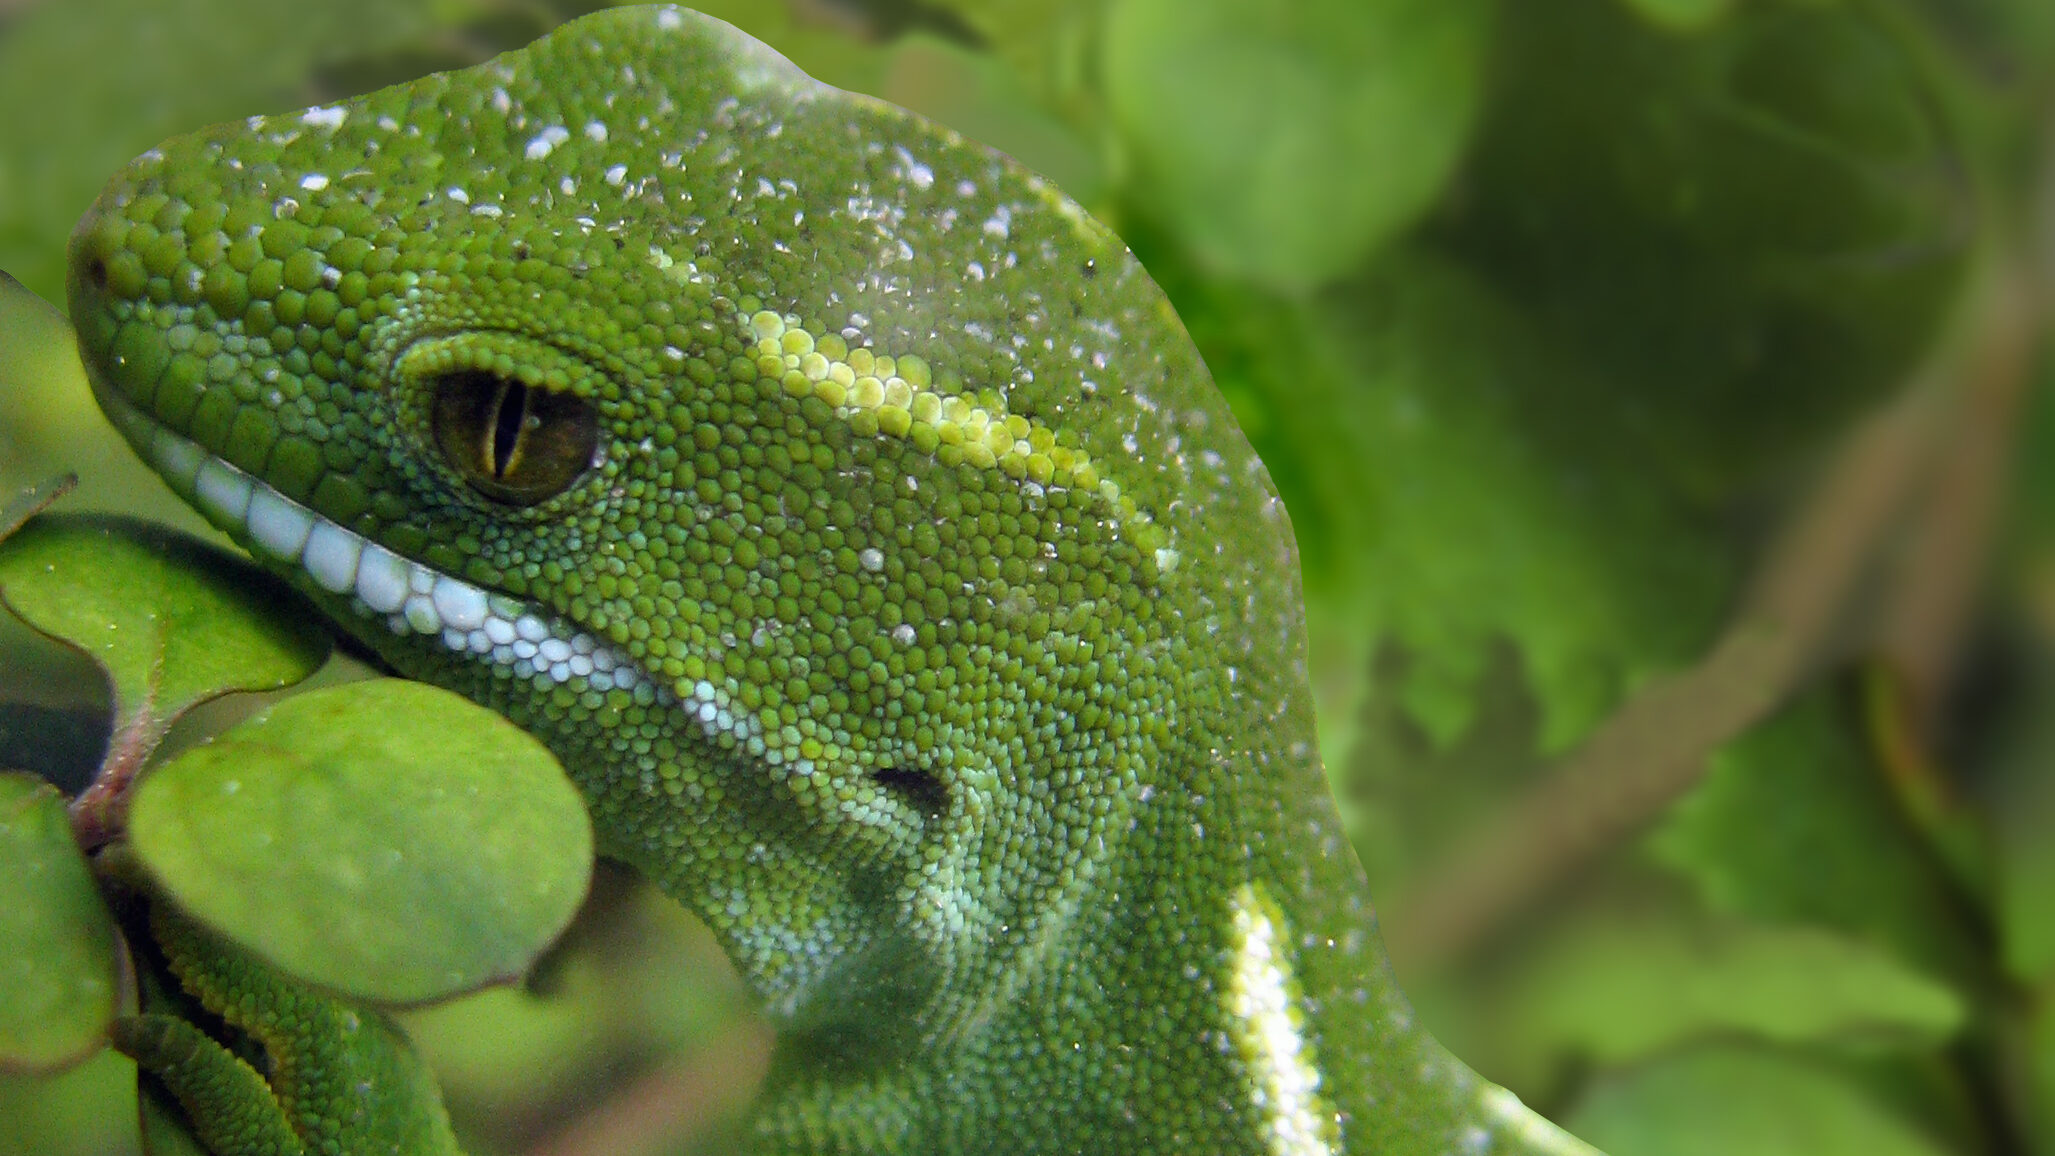 A close up of the Wellington green gecko